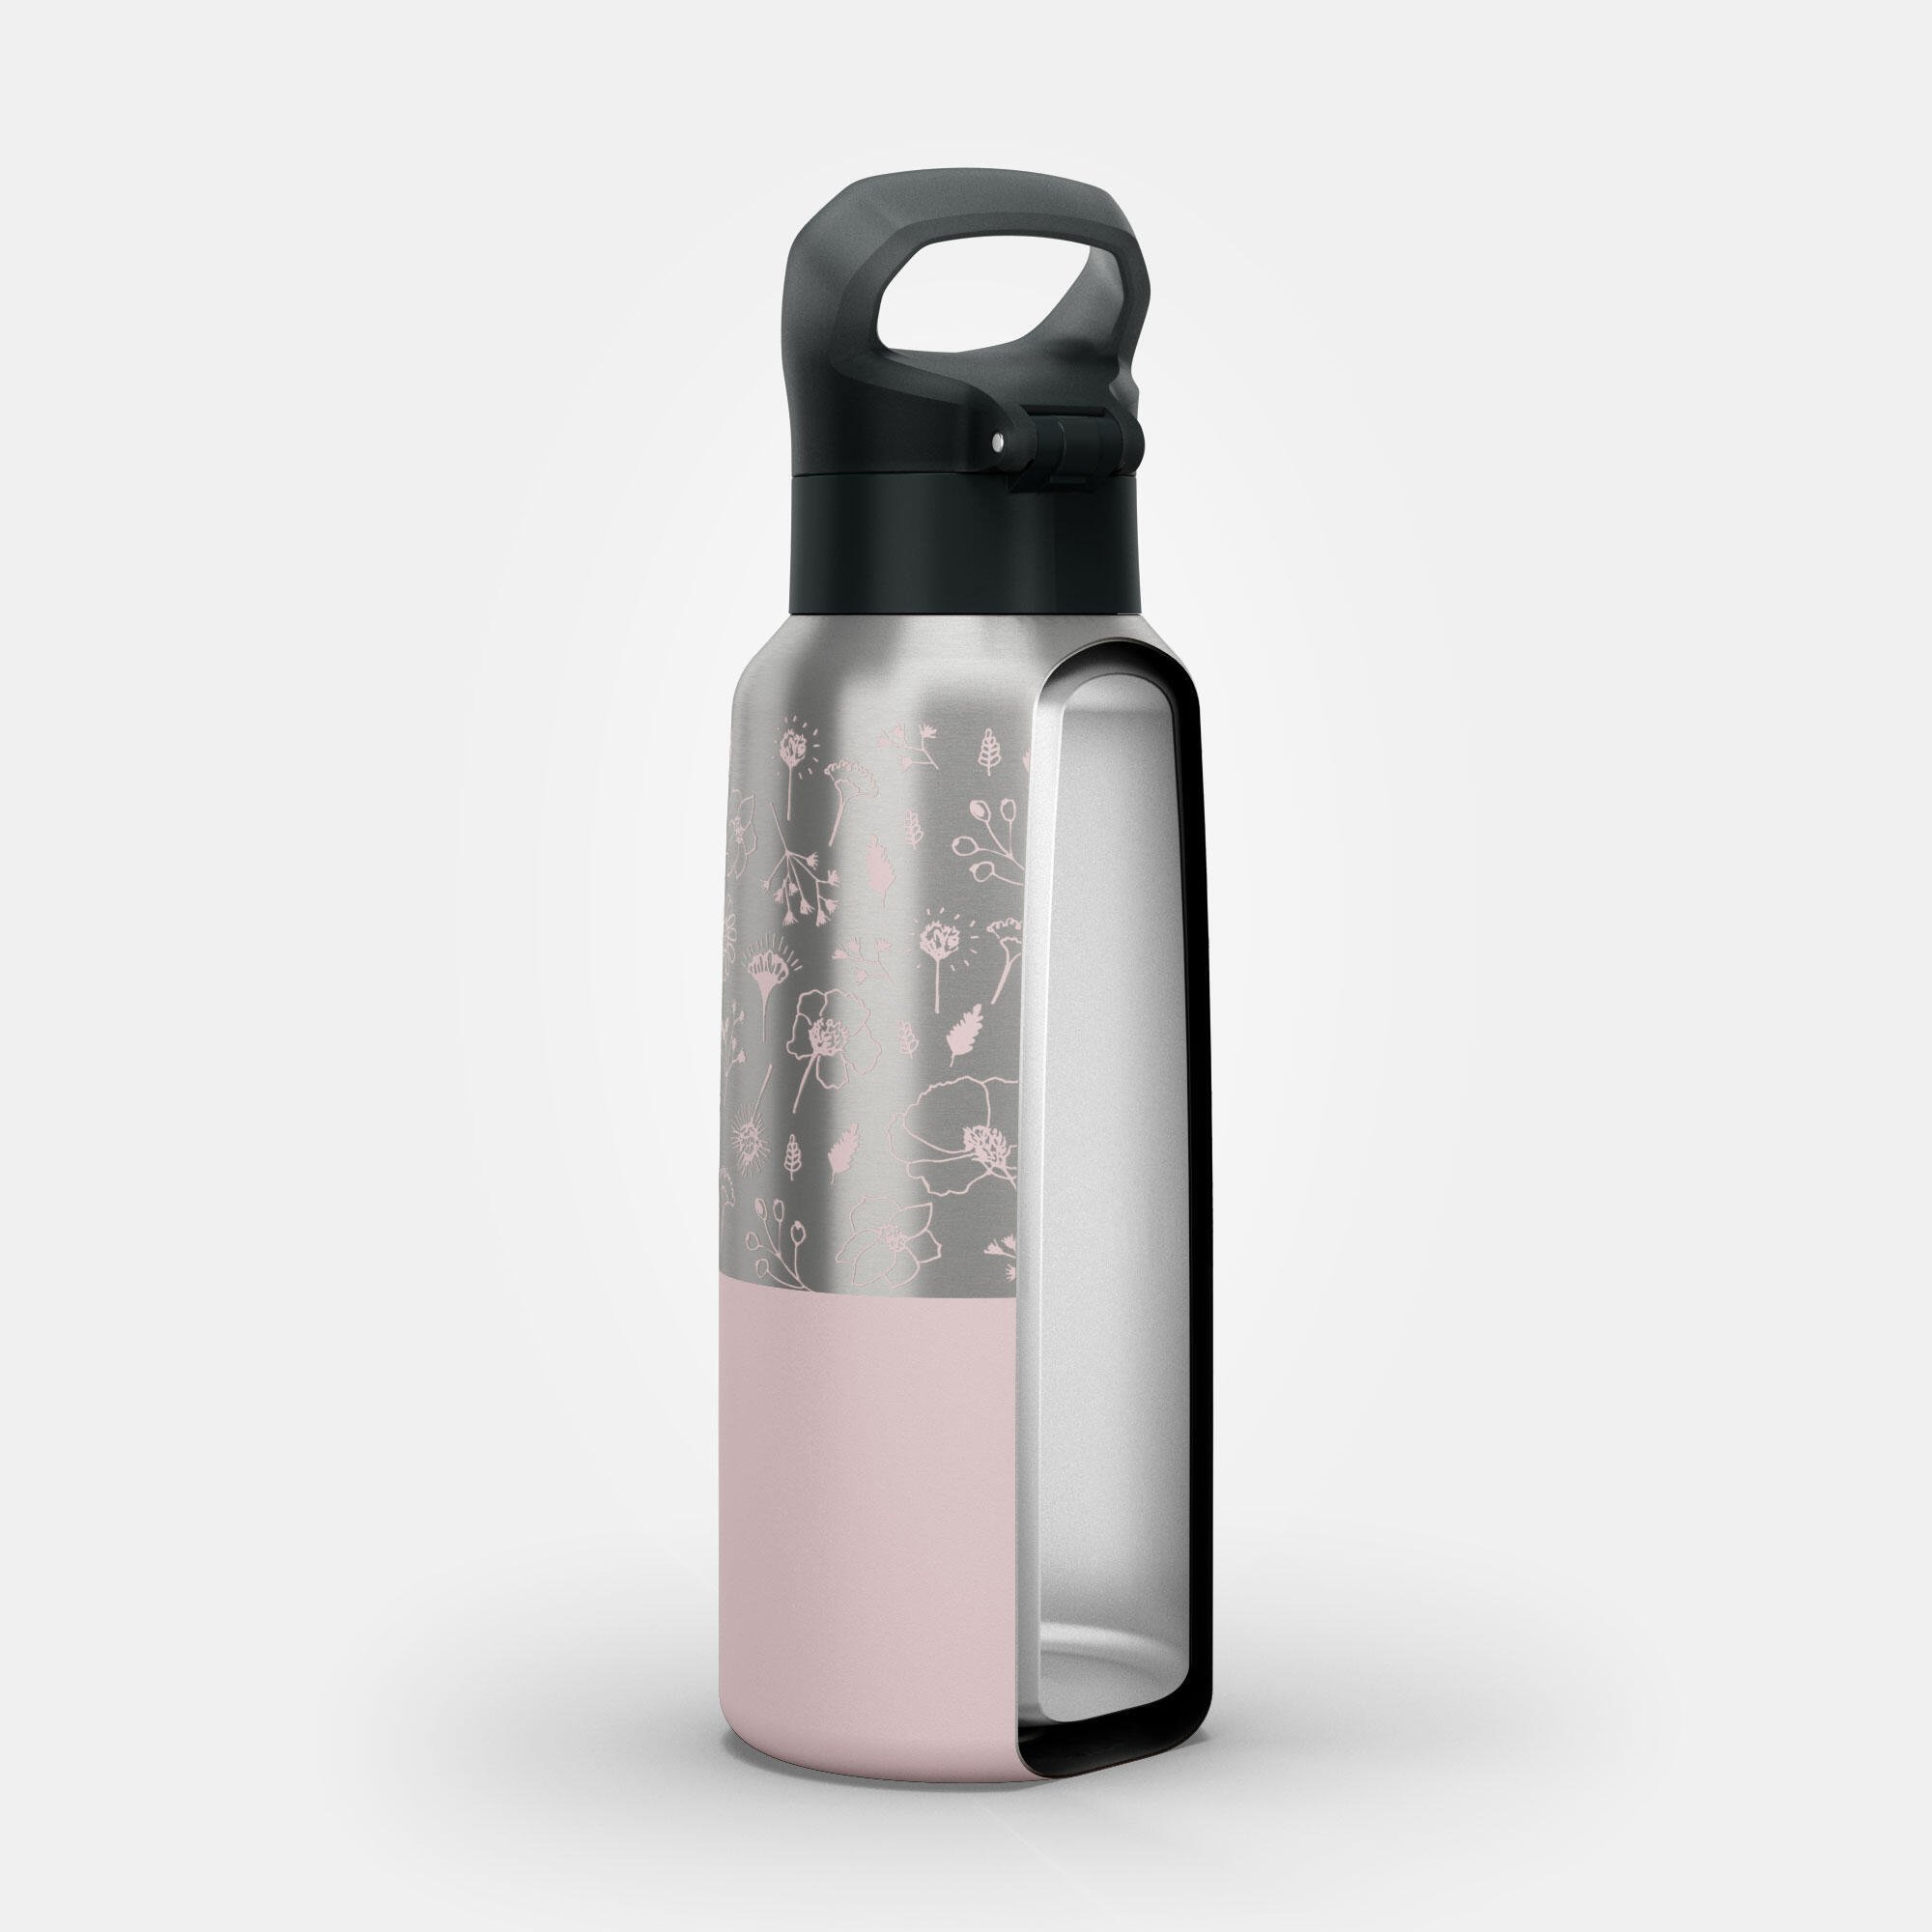 Hiking Insulated Stainless Steel Flask MH500 0.5L Pink 12/12